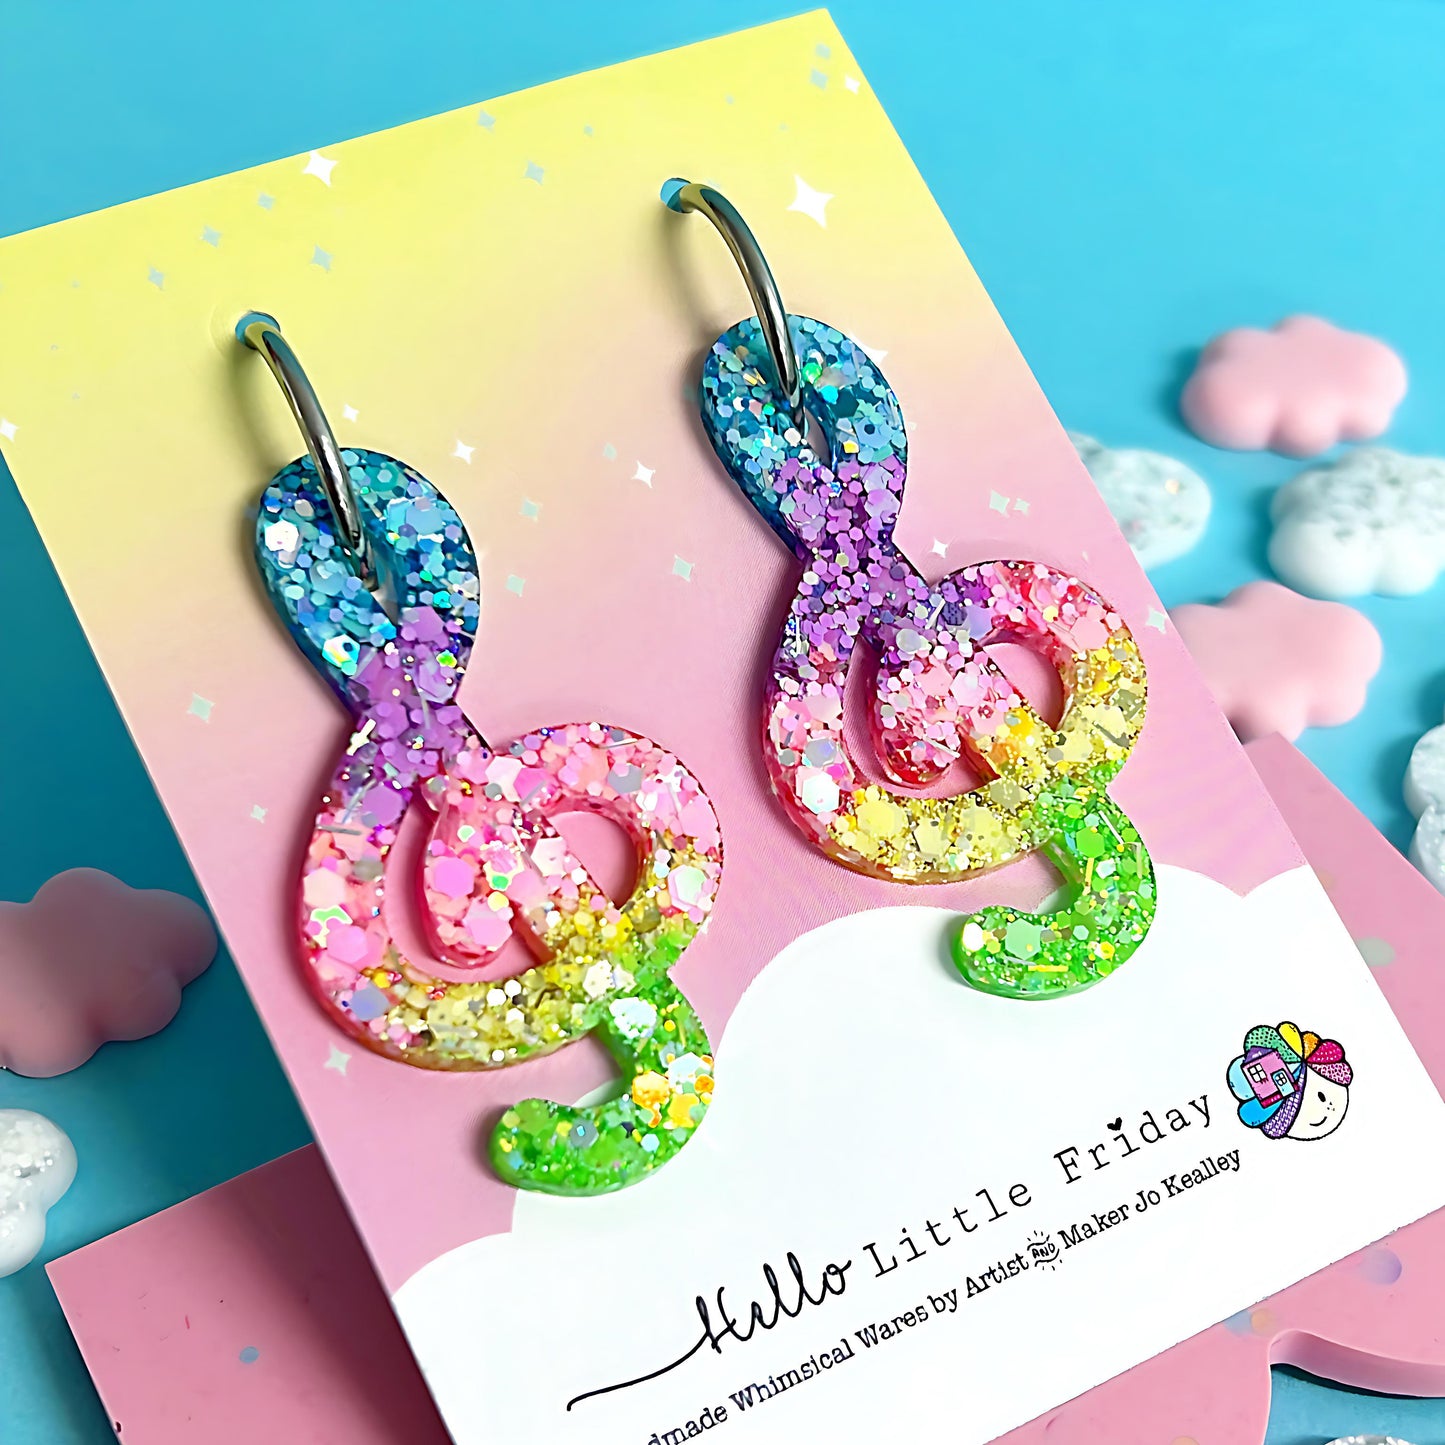 WE ARE THE MUSIC MAKERS : RAINBOW OMBRÉ : Handmade Resin DROP Earrings